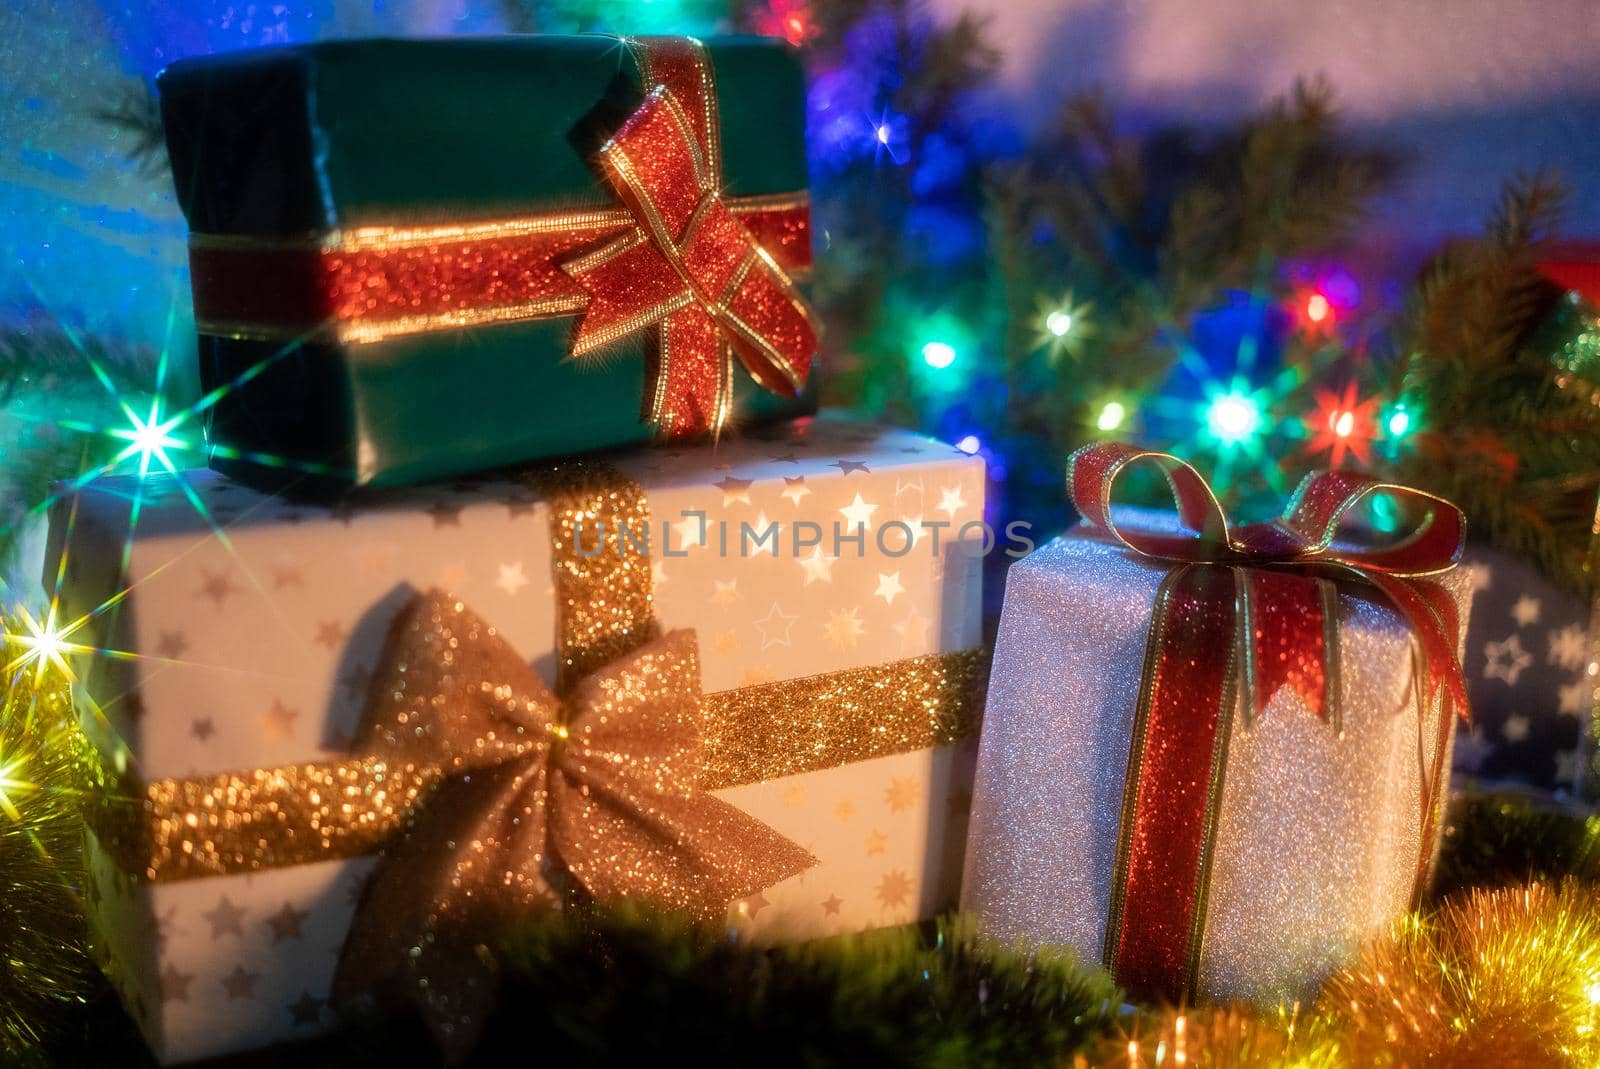 Christmas background with gift boxes. Presents with ribbons and bows, holidays concept. by kristina_kokhanova